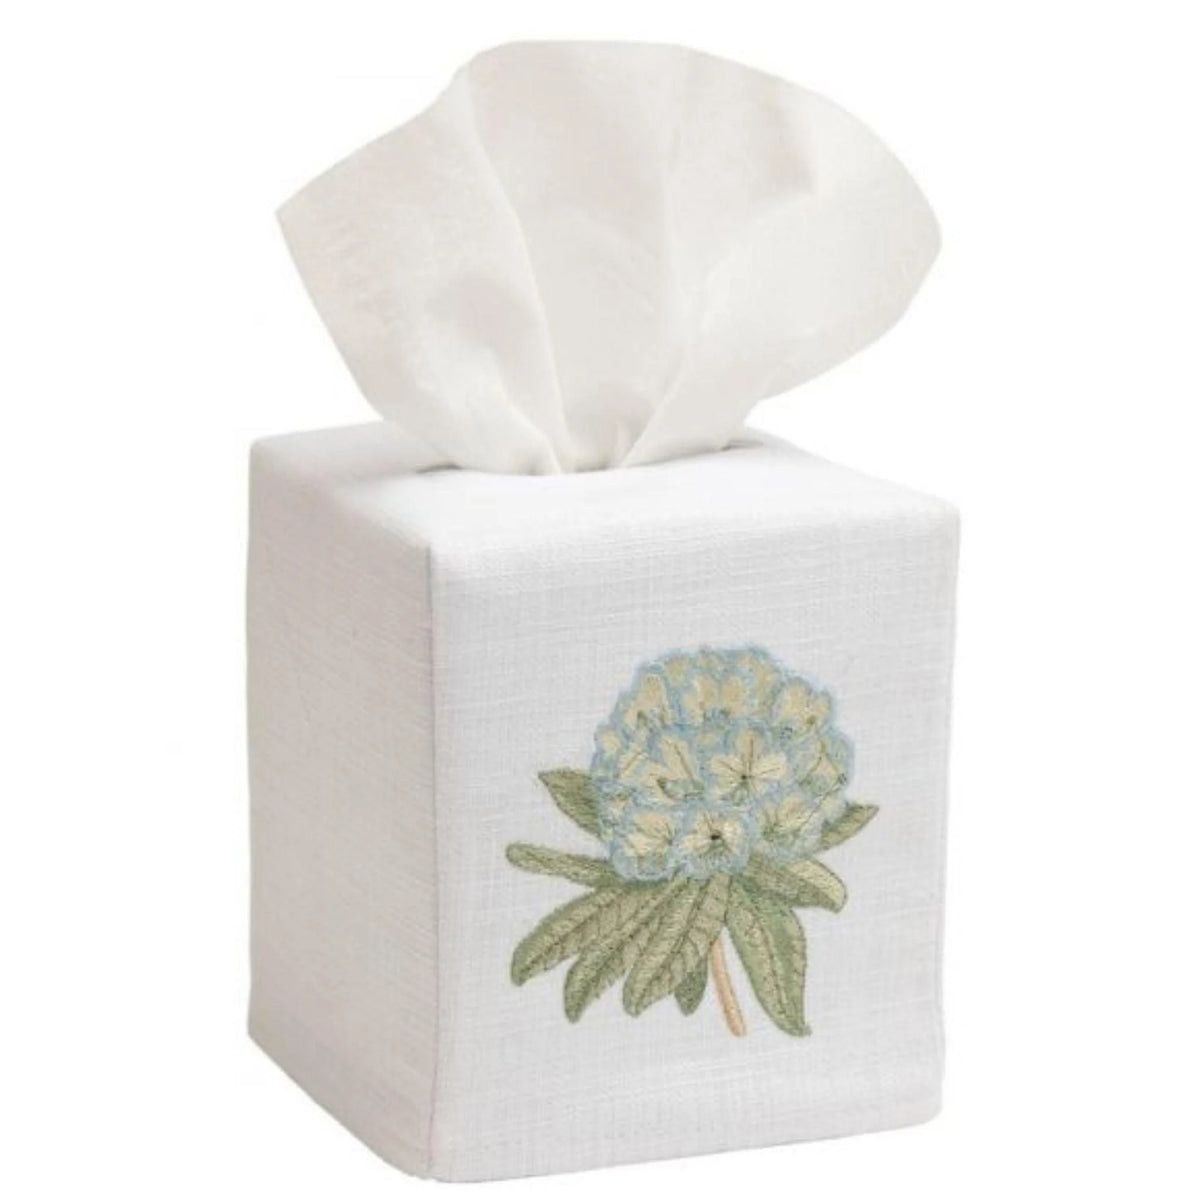 White Linen and Cotton Tissue Box Cover with Embroidered Blue Rhododendron | The Well Appointed House, LLC